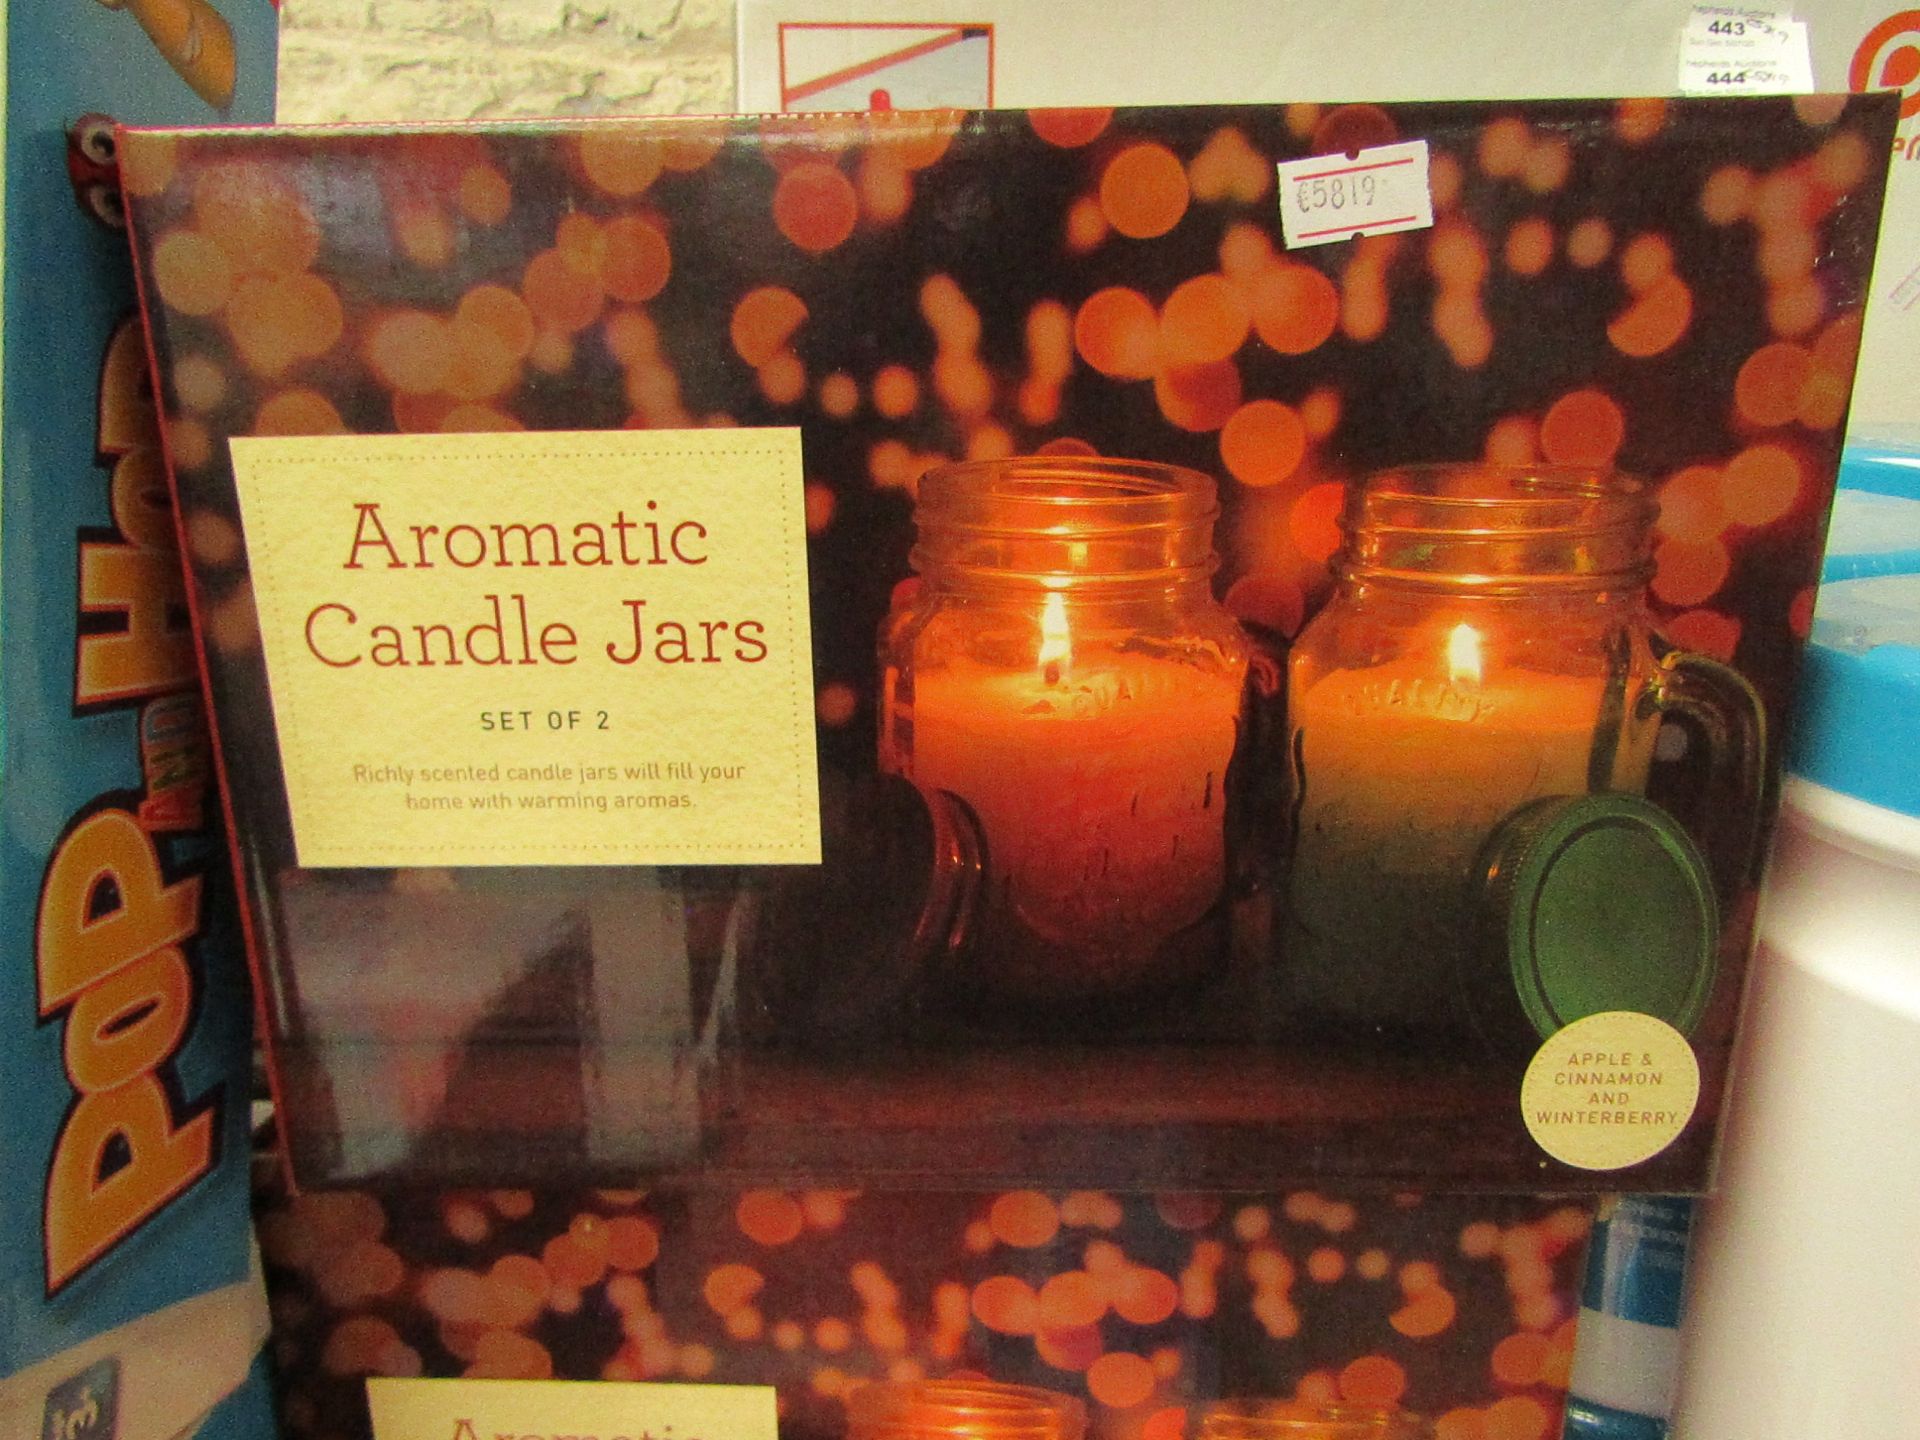 1 x Set of 2 Aromatic Candle Jars Apple & Cinnamon & Winterberry new & packaged